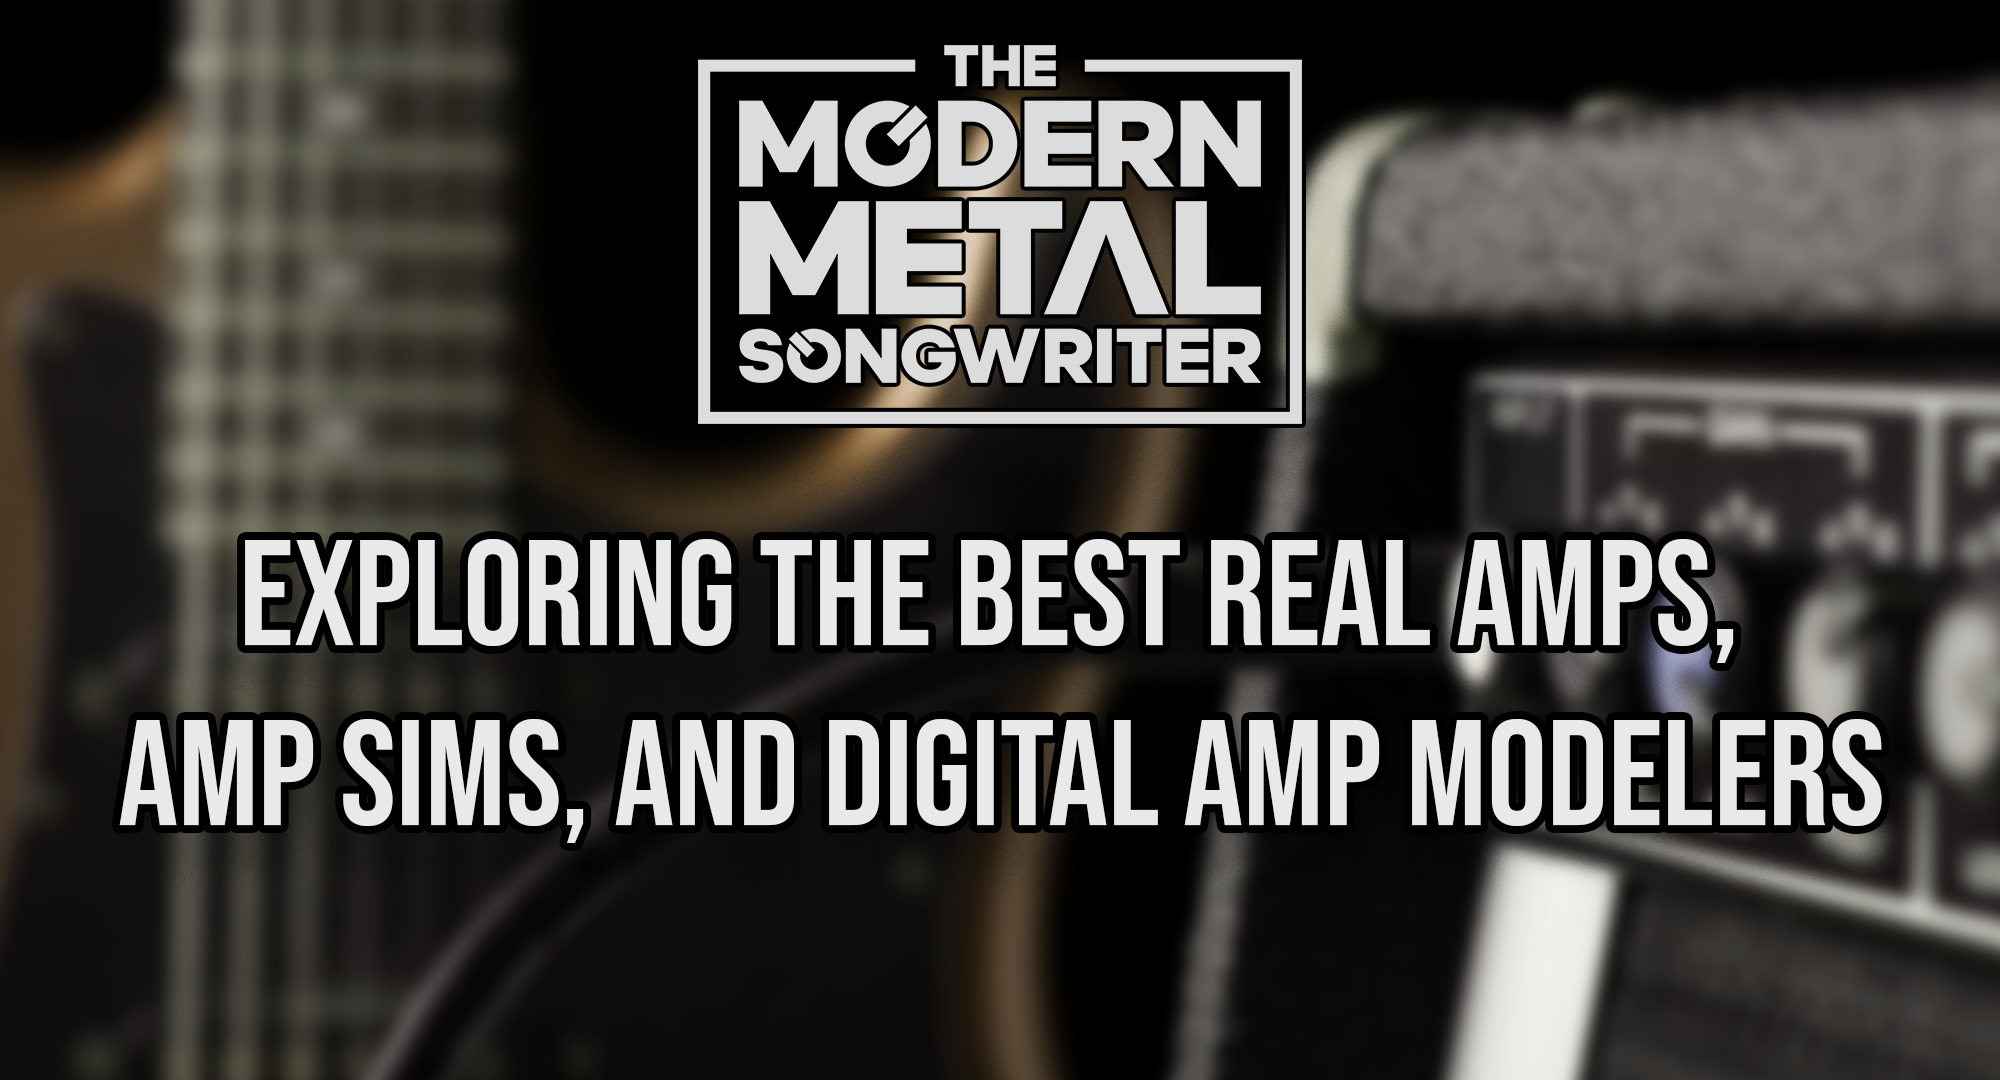 Exploring-the-BEST-Real-Amps-Amp-Sims-and-Digital-Amp-Modelers ModernMetalSongwriter graphic